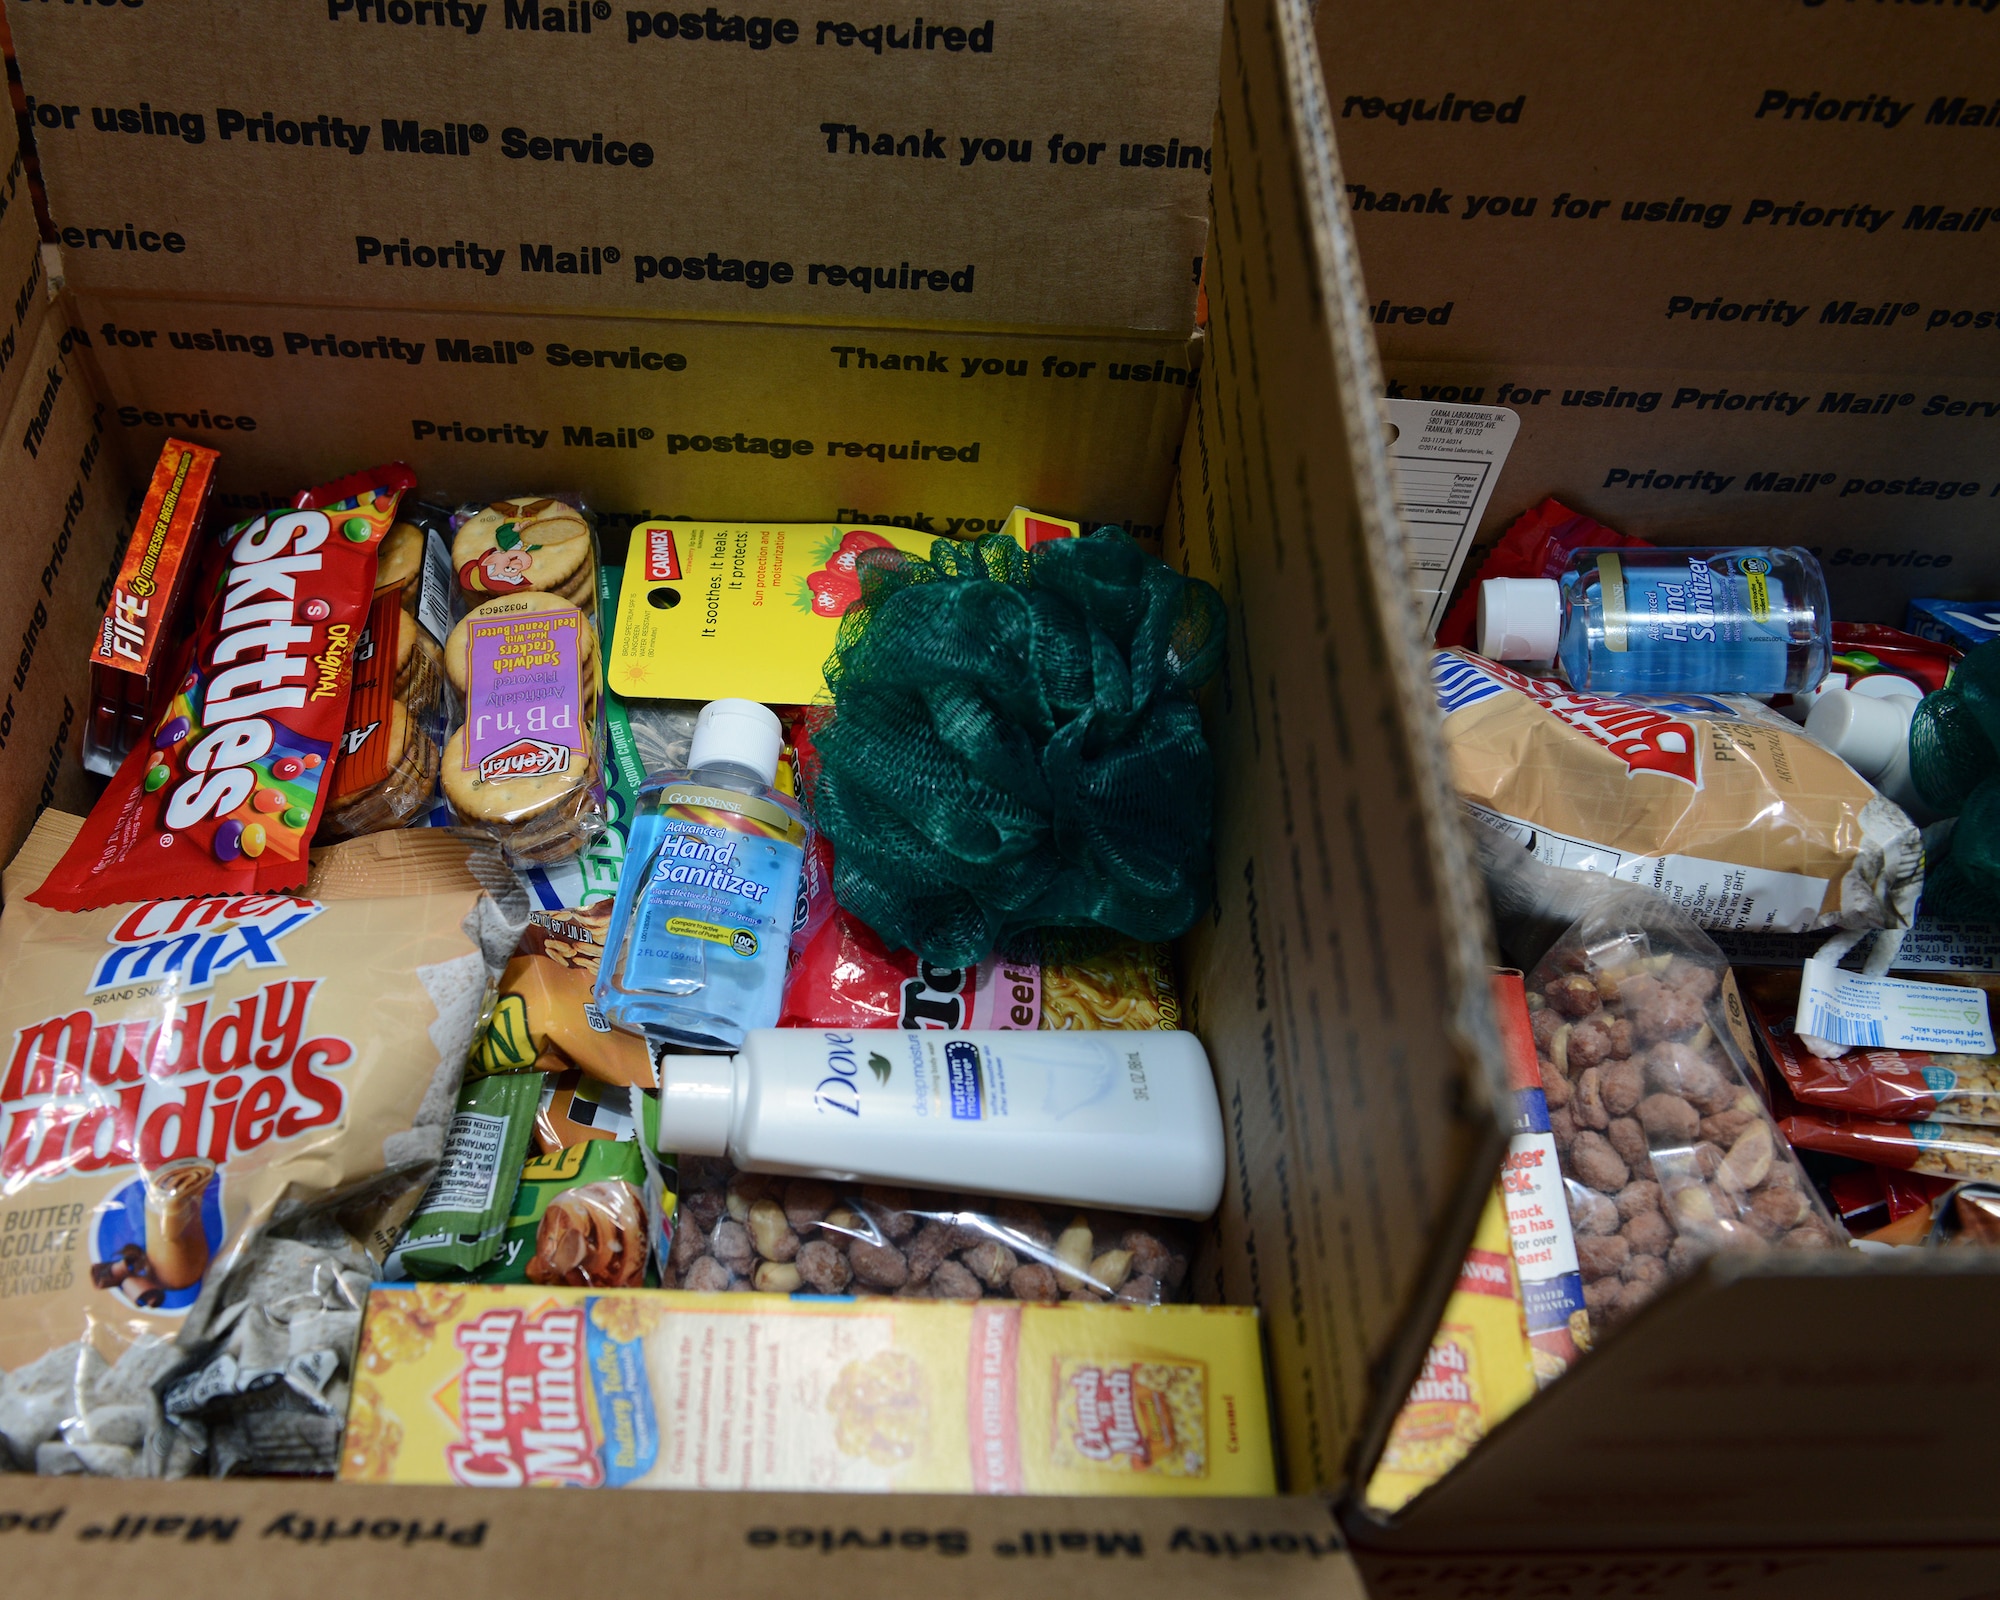 Boxes full of snacks and hygiene items sit at Laughlin Air Force Base, Texas, Dec. 10, 2015. Items were donated at various “drop spots” on base, before being collected, packed and shipped to Laughlin’s deployed members. (U.S. Air Force photo by Senior Airman Jimmie D. Pike)